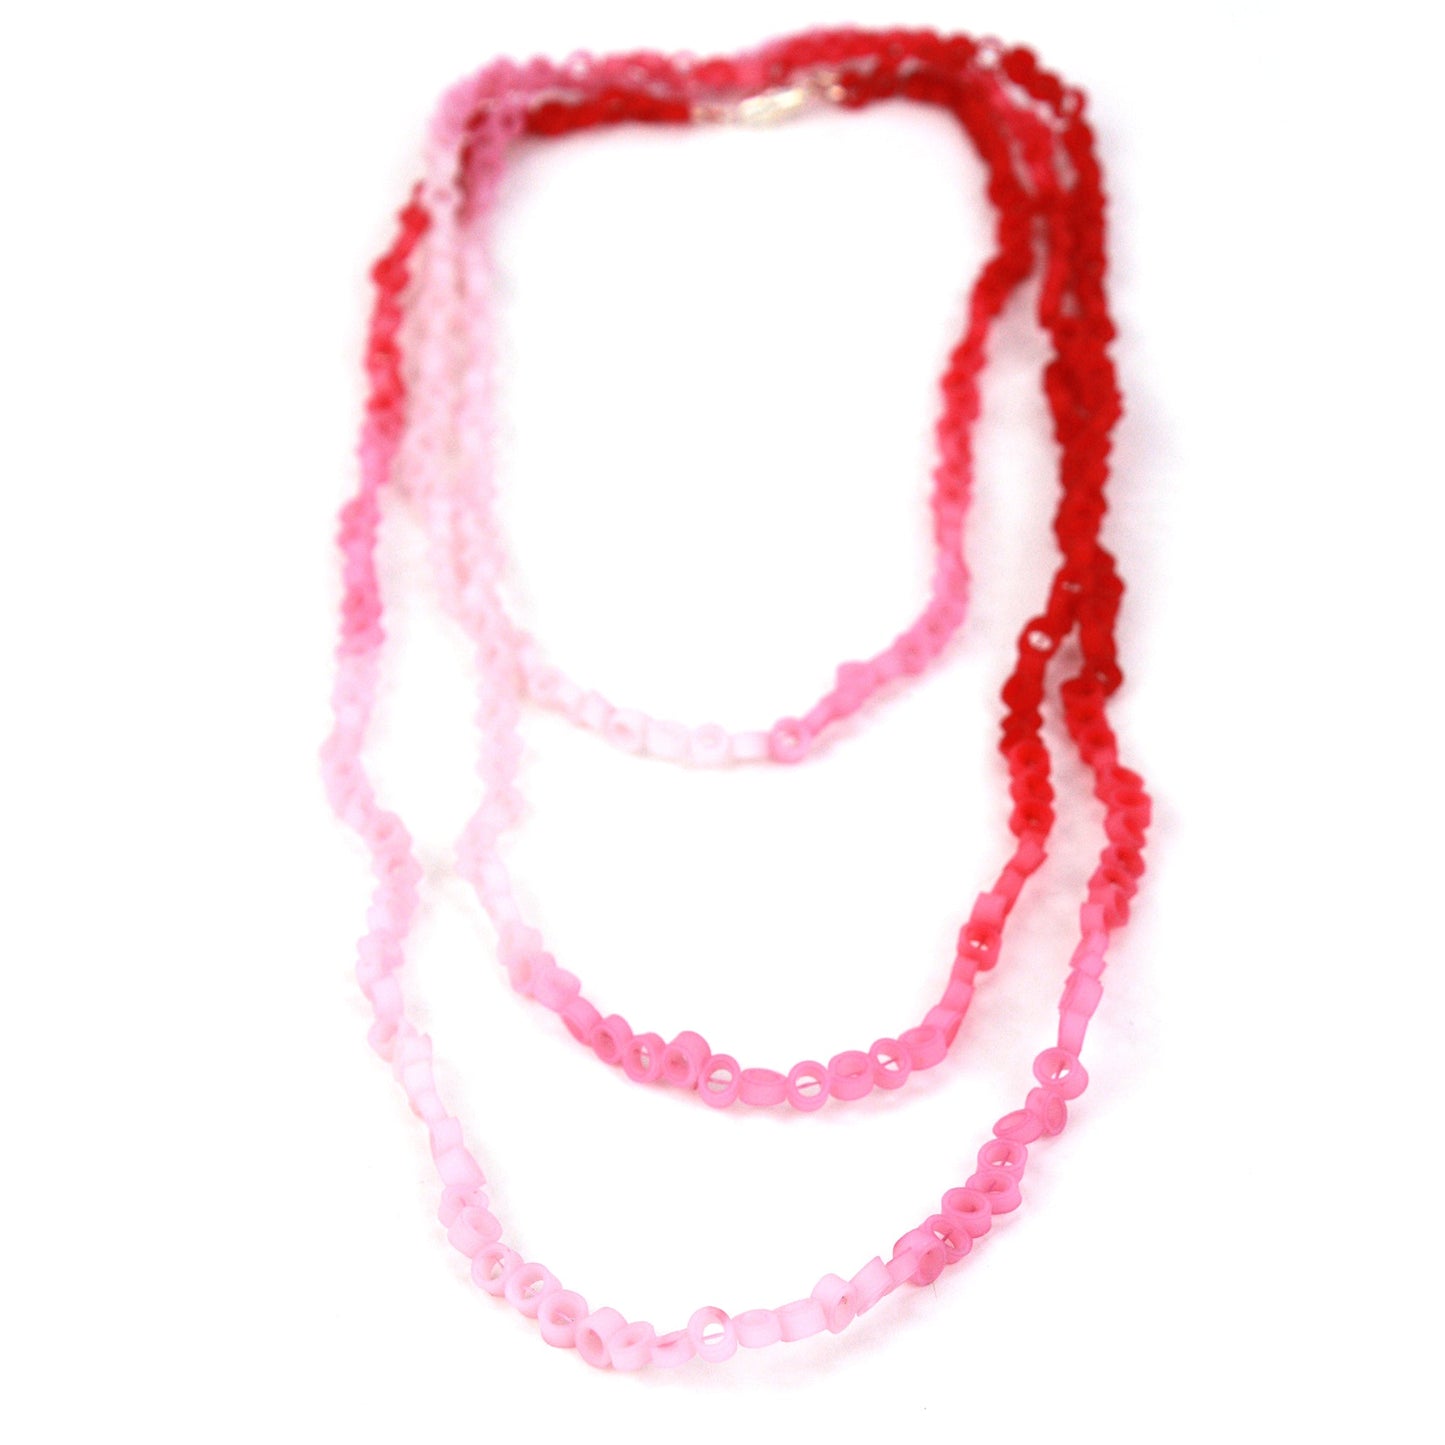 Little links necklace - Pink and red